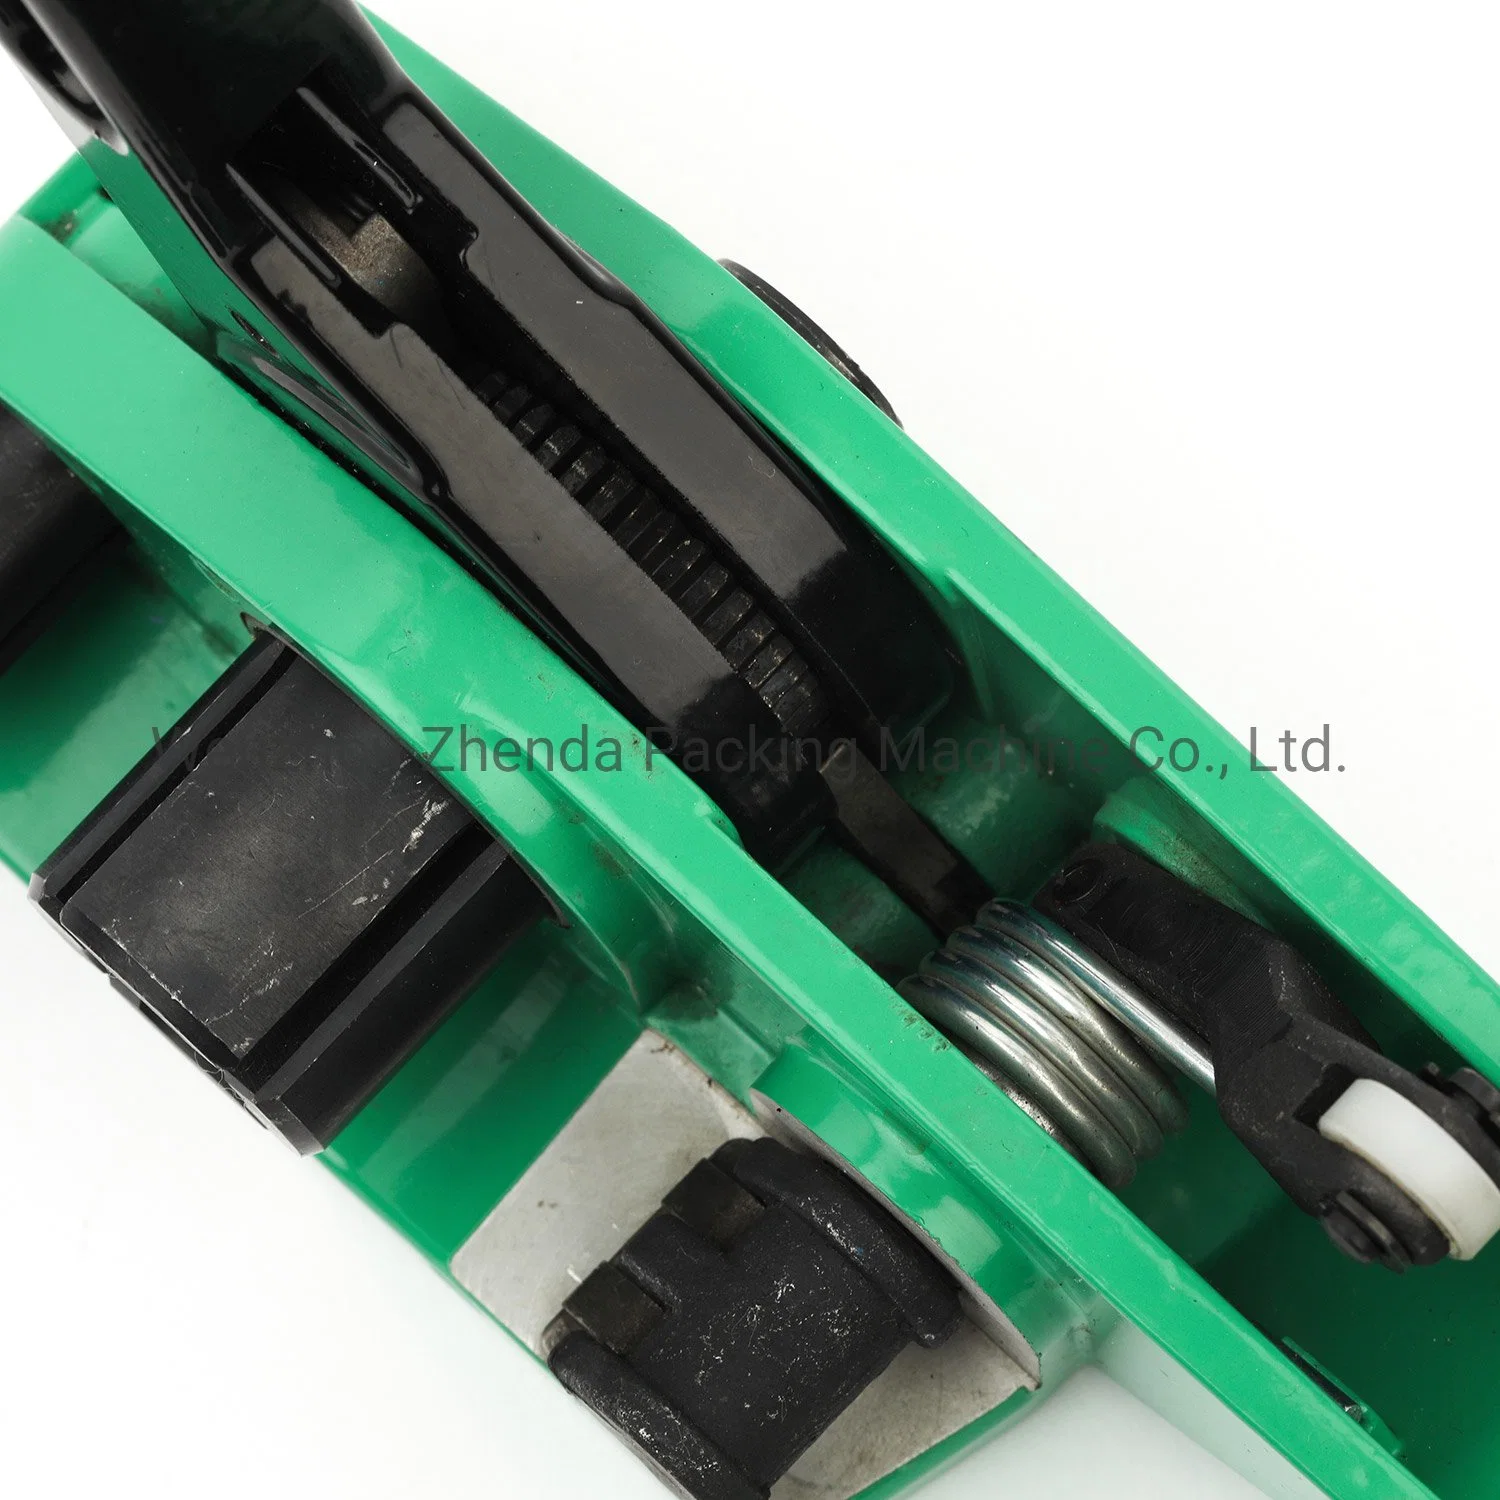 Tensioner Plastic Strapping up to 5/8" Wide Strap (B315)